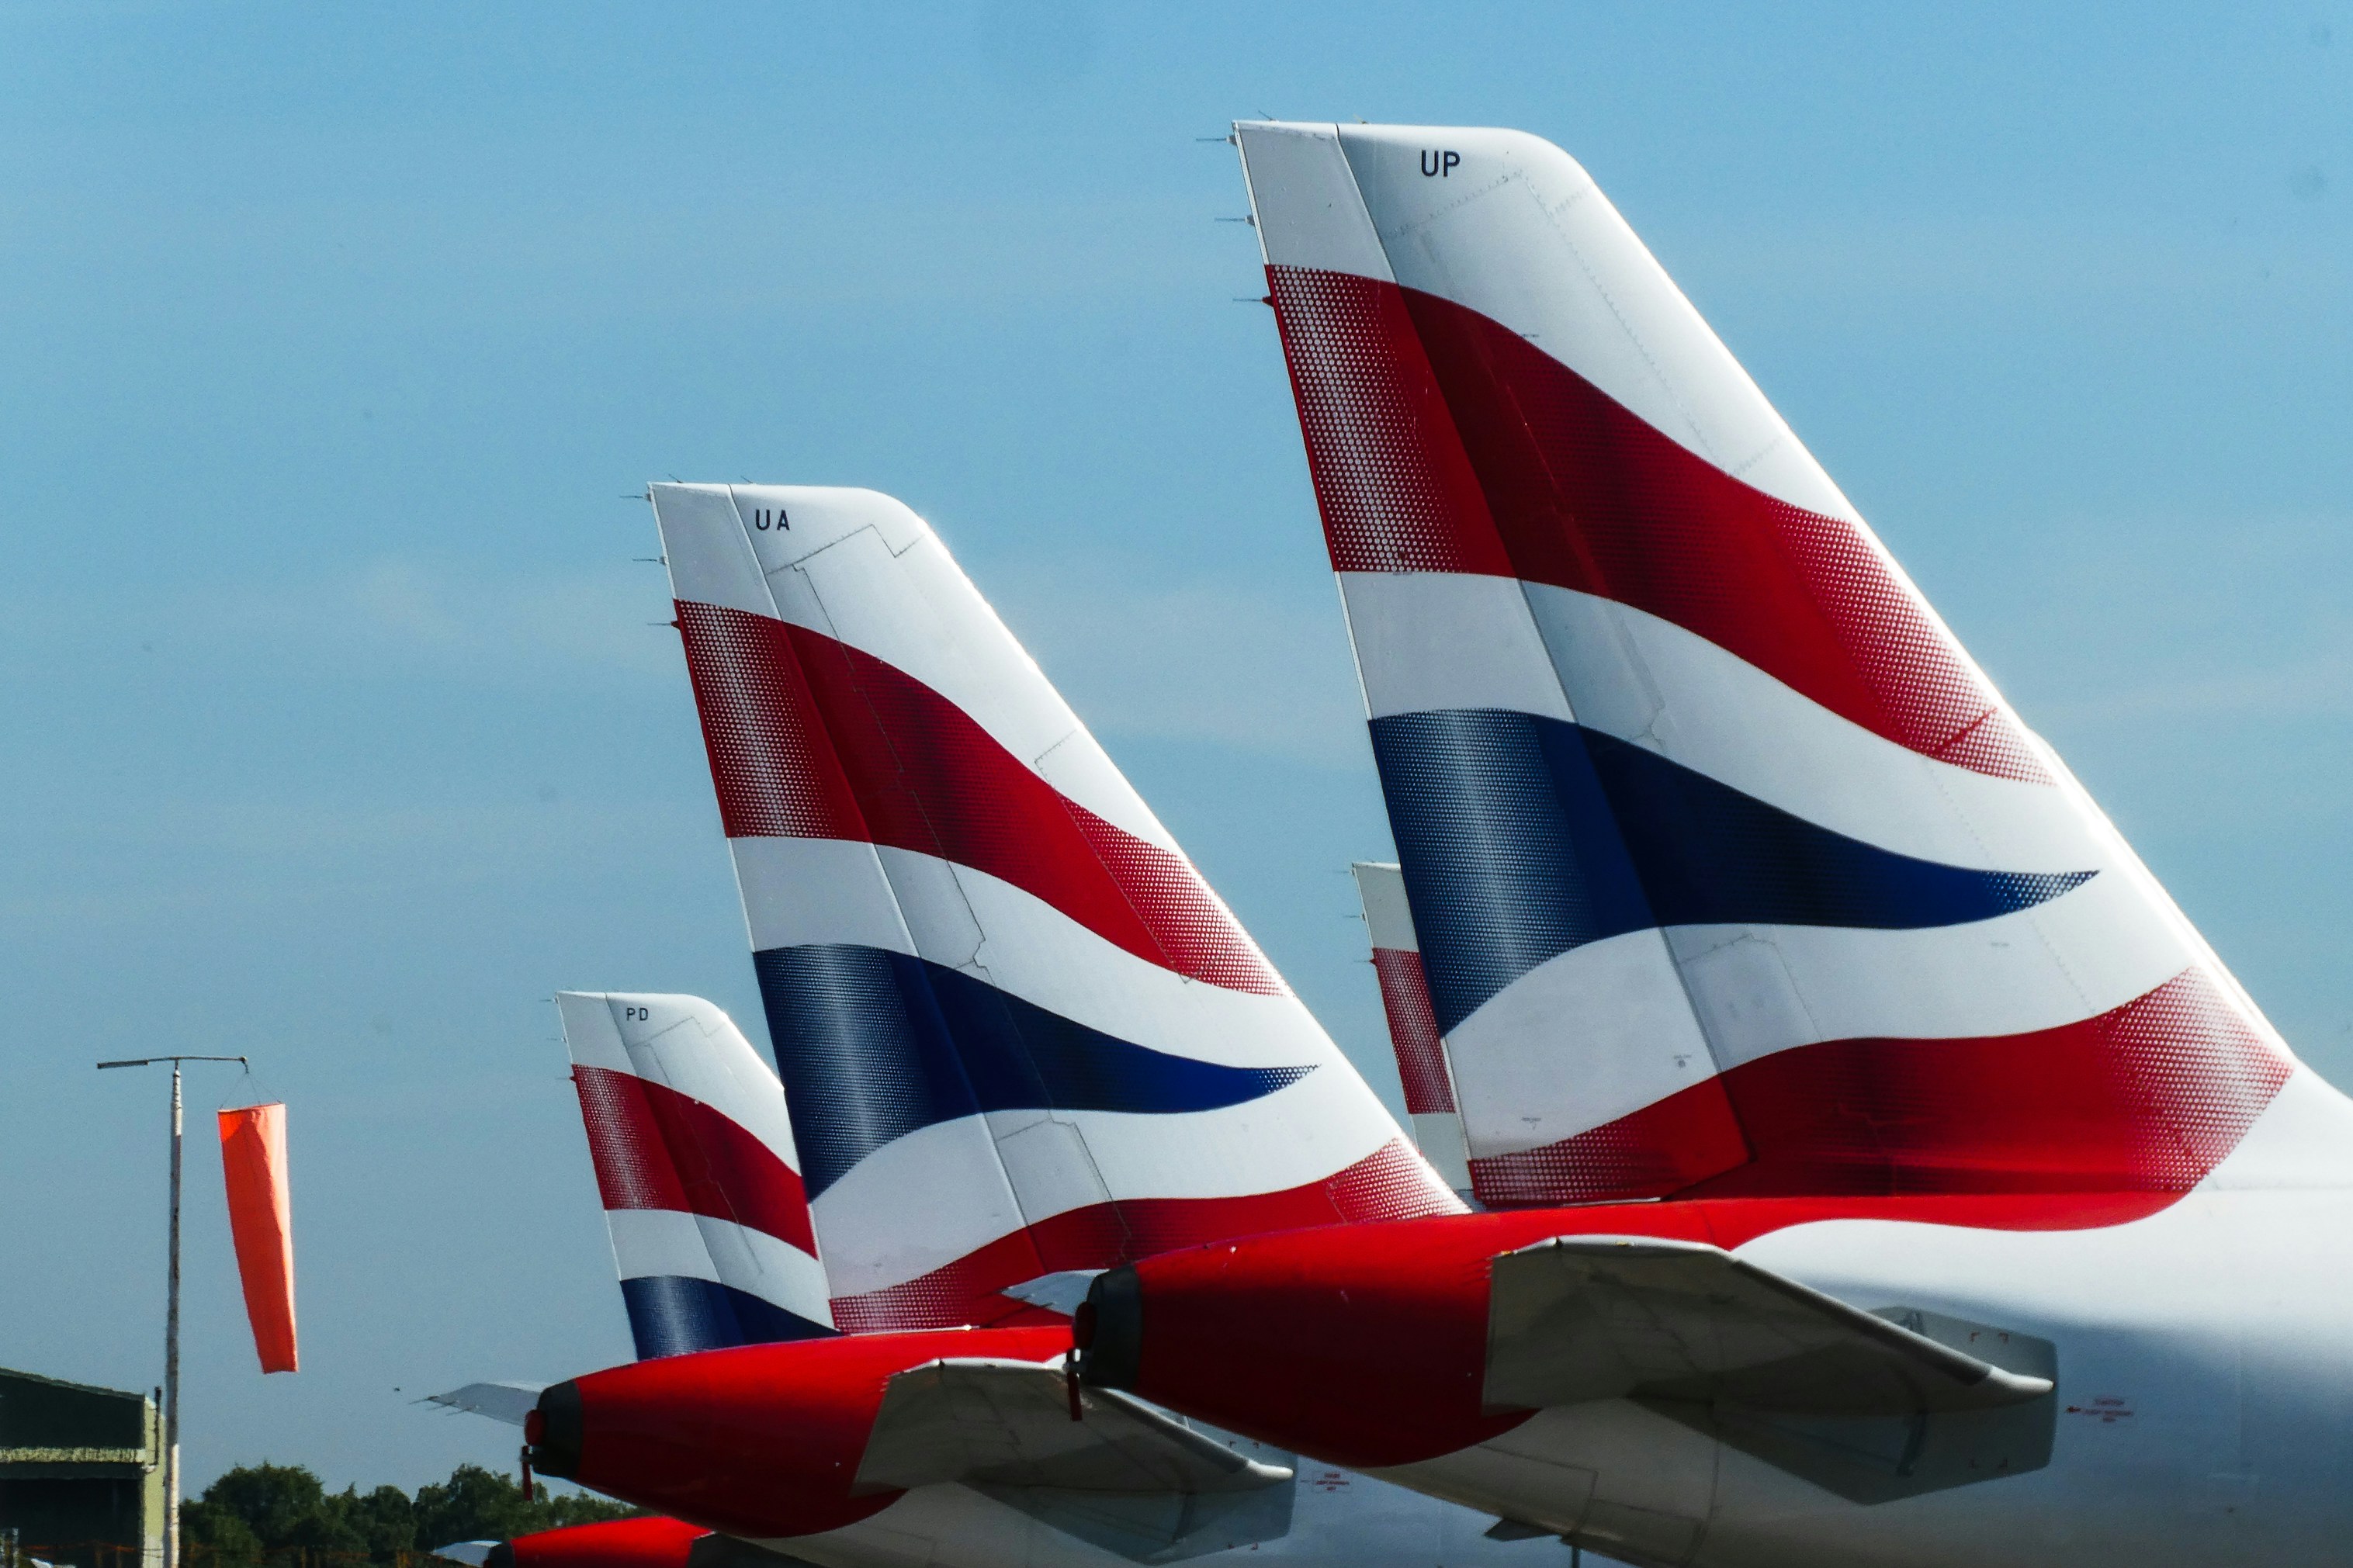 Three of the many British Airways aircraft, parked at Bournemouth Airport, due to the global pandemic.